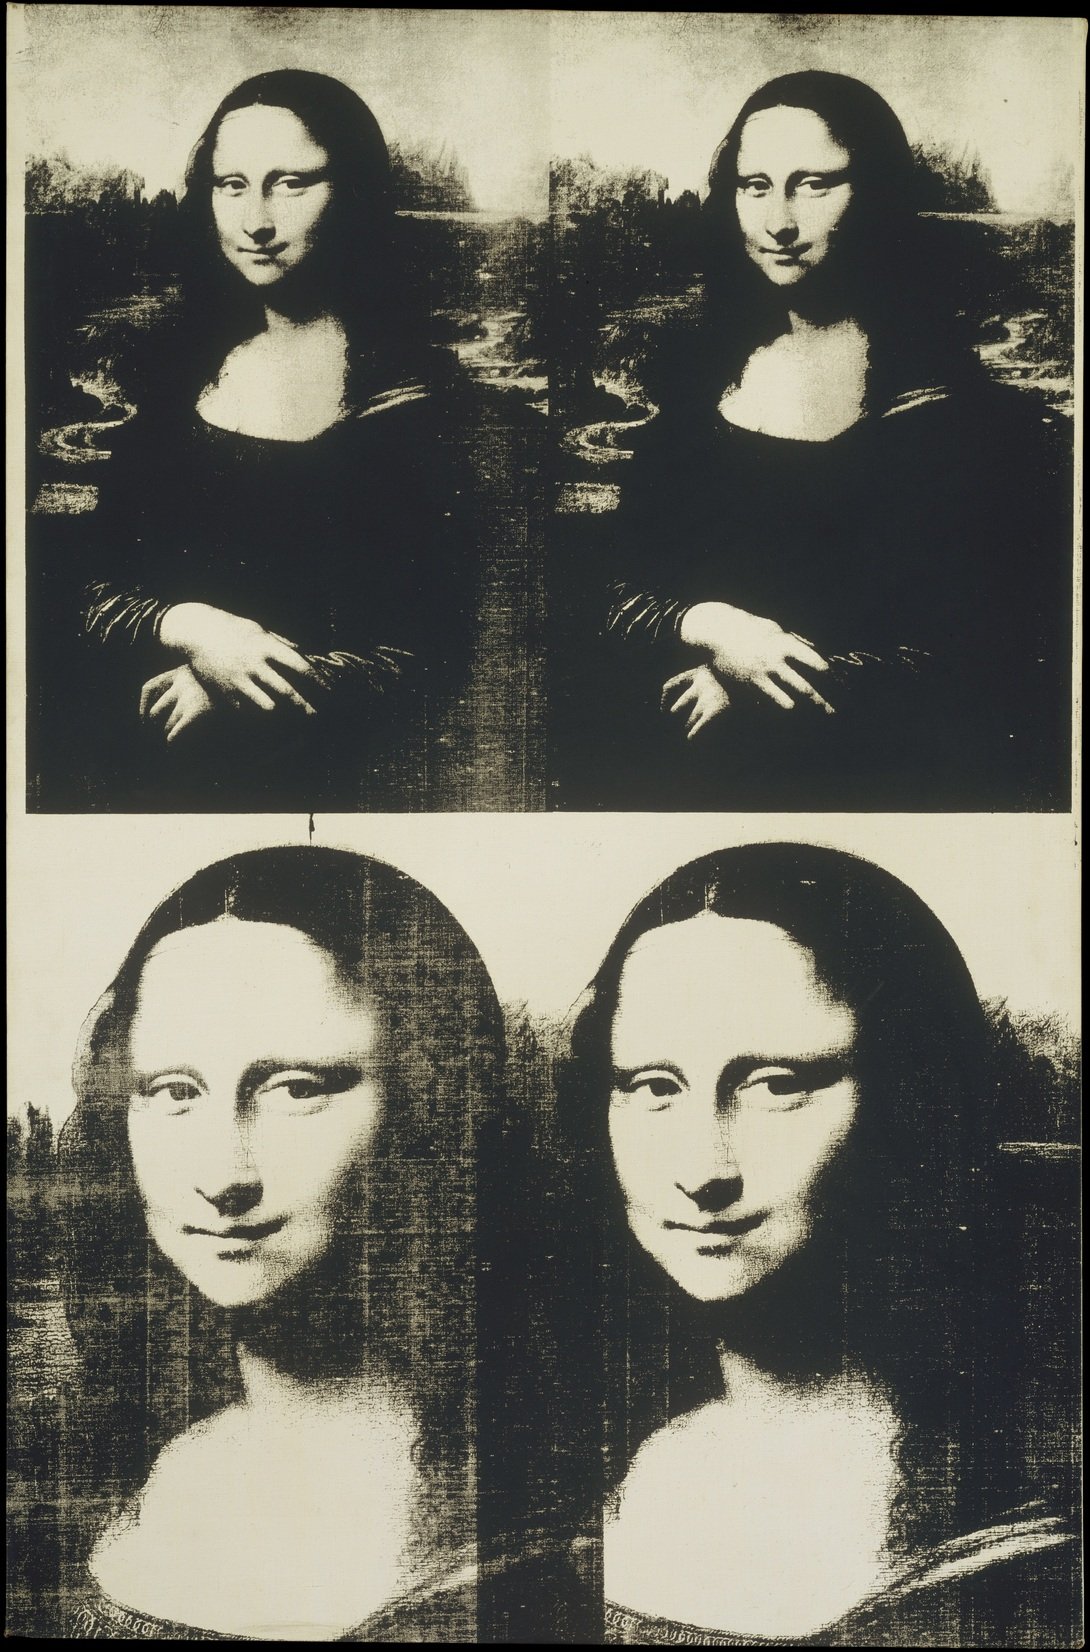 Andy Warhol, Mona Lisa, 1963. Acrylic and silkscreen on canvas. 44 x 29 in. The Metropolitan Museum of Art, New York © 2020 Andy Warhol Foundation for the Visual Arts, Inc. / Licensed by Artists Rights Society (ARS), New York.